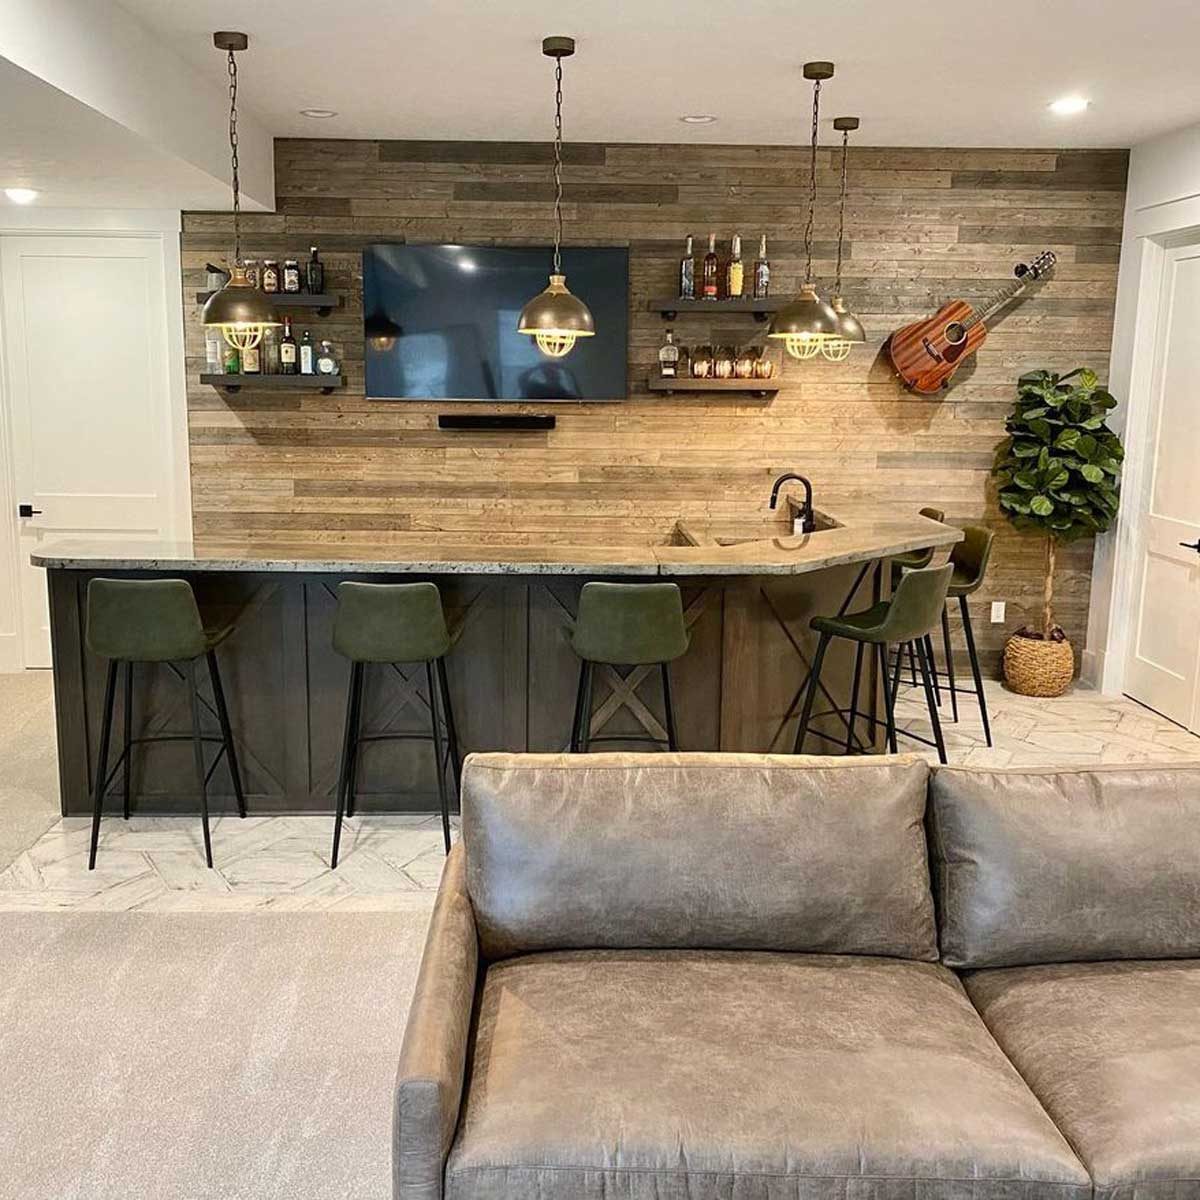 How to build DIY basement bar (with plans)